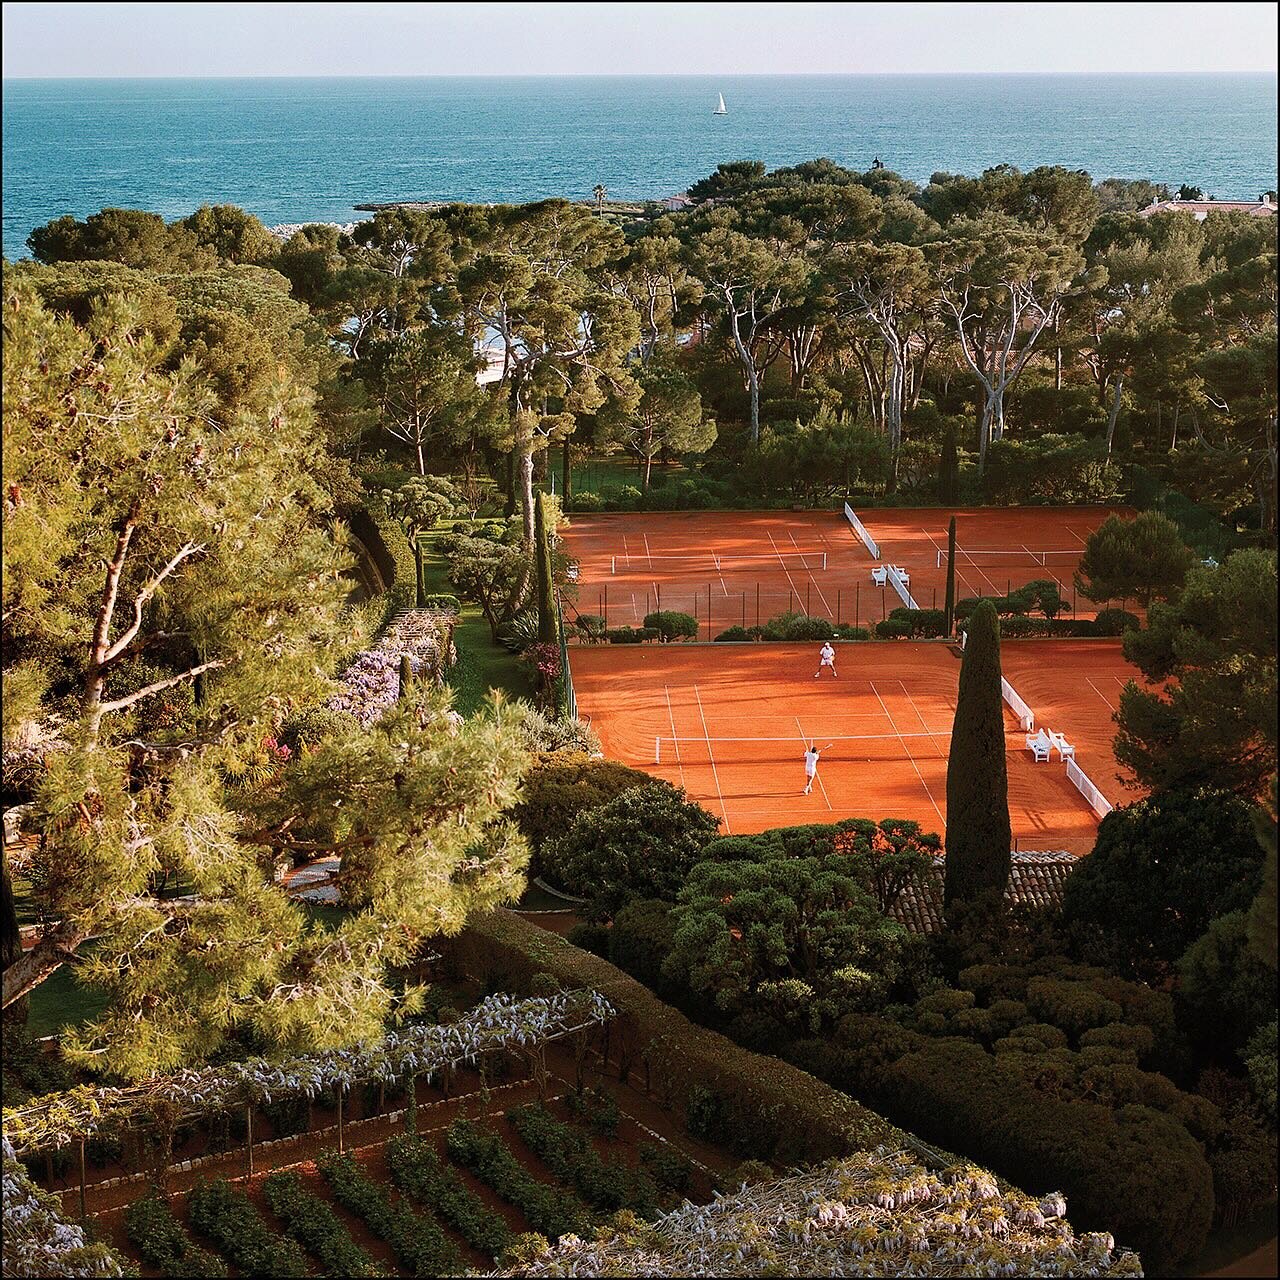 Love Tennis? Then take inspiration from these four incredible hotel tennis courts for your next vacation&hellip;

1) Hotel du Cap Eden Roc, France
2) Cheval Blanc Randheli, Maldives
3) Il San Pietro di Positano, Italy
4) Soneva Fushi, Maldives 

@hot